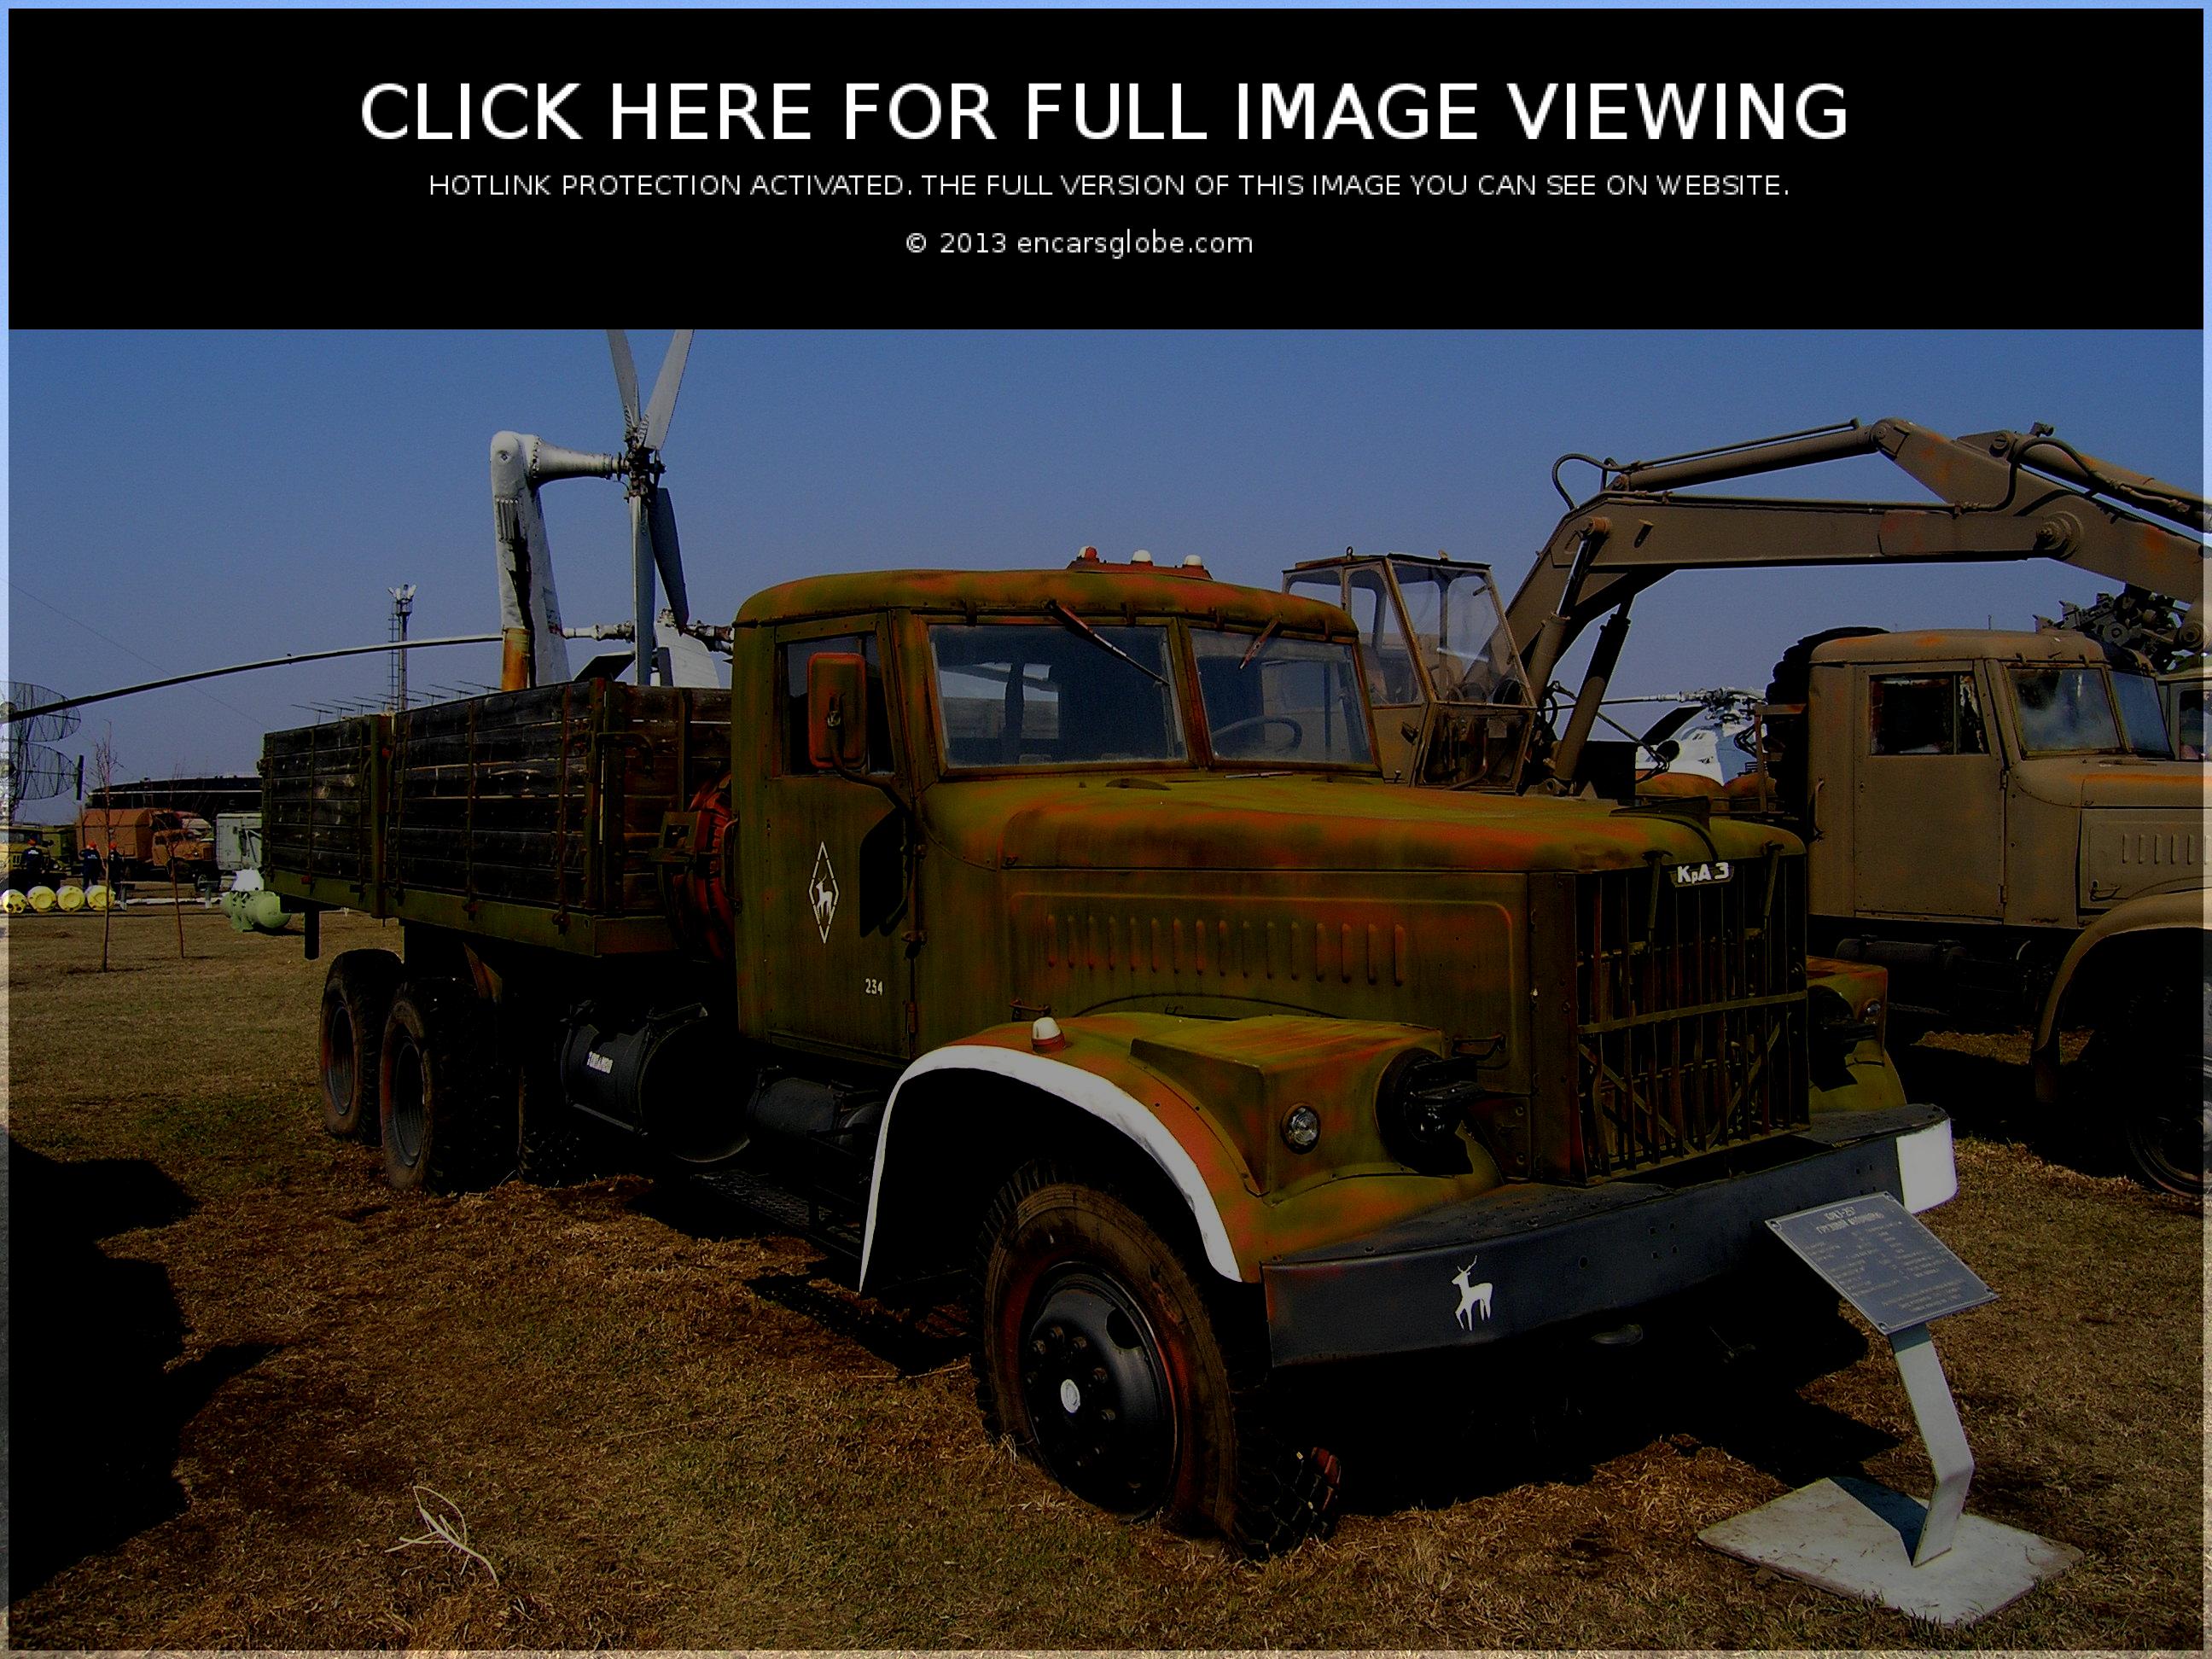 KrAZ 257 B1: Photo gallery, complete information about model ...